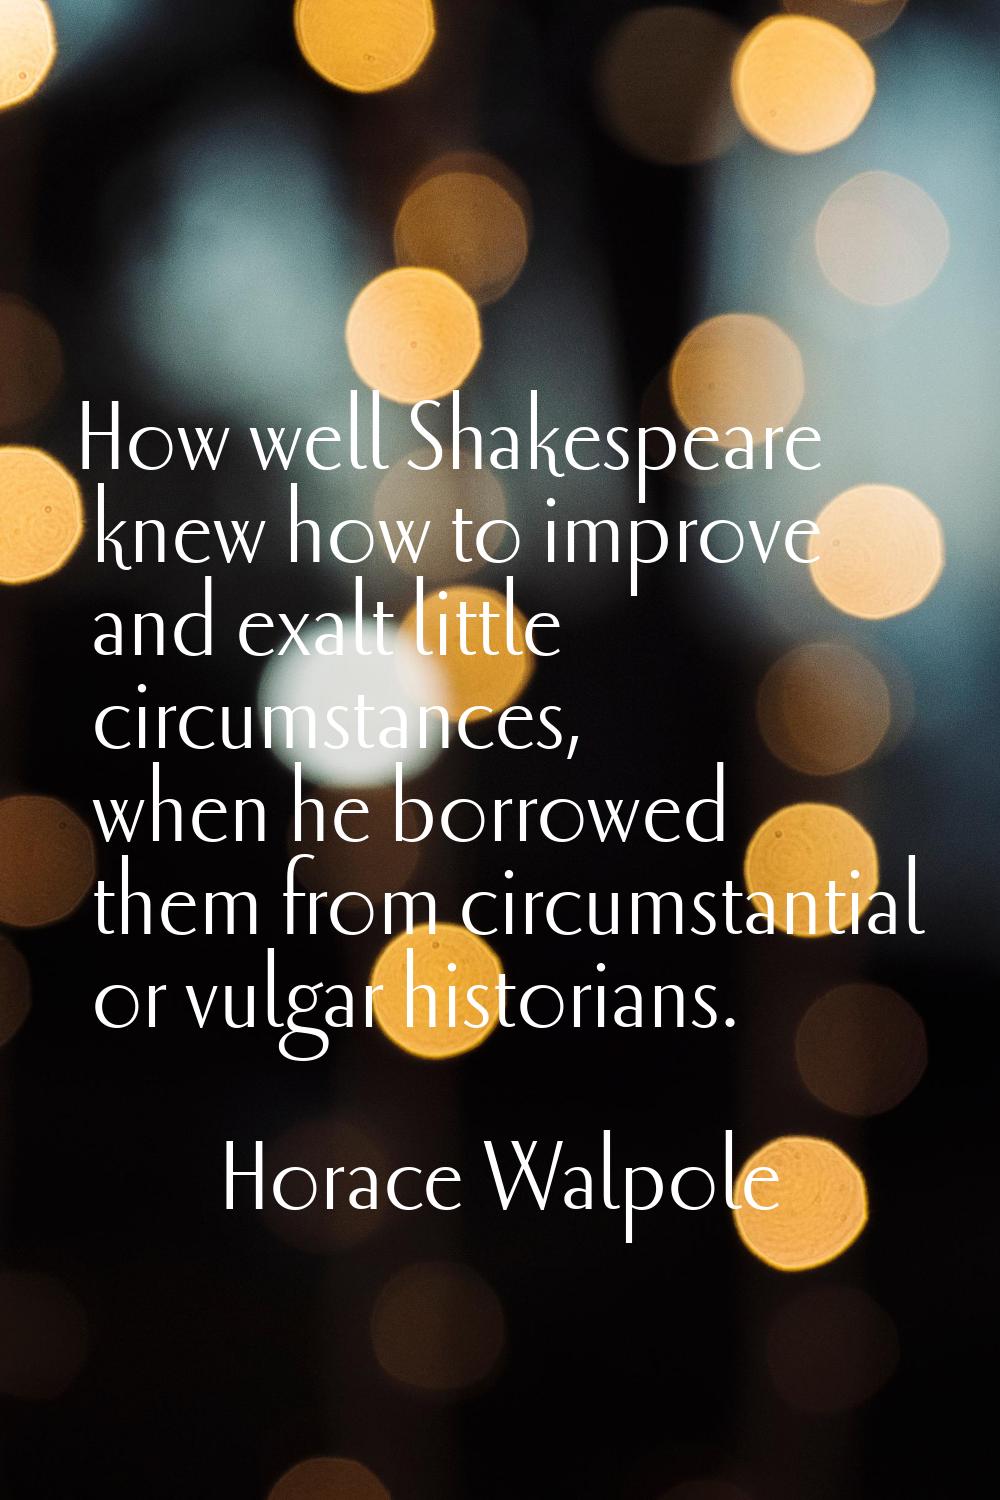 How well Shakespeare knew how to improve and exalt little circumstances, when he borrowed them from